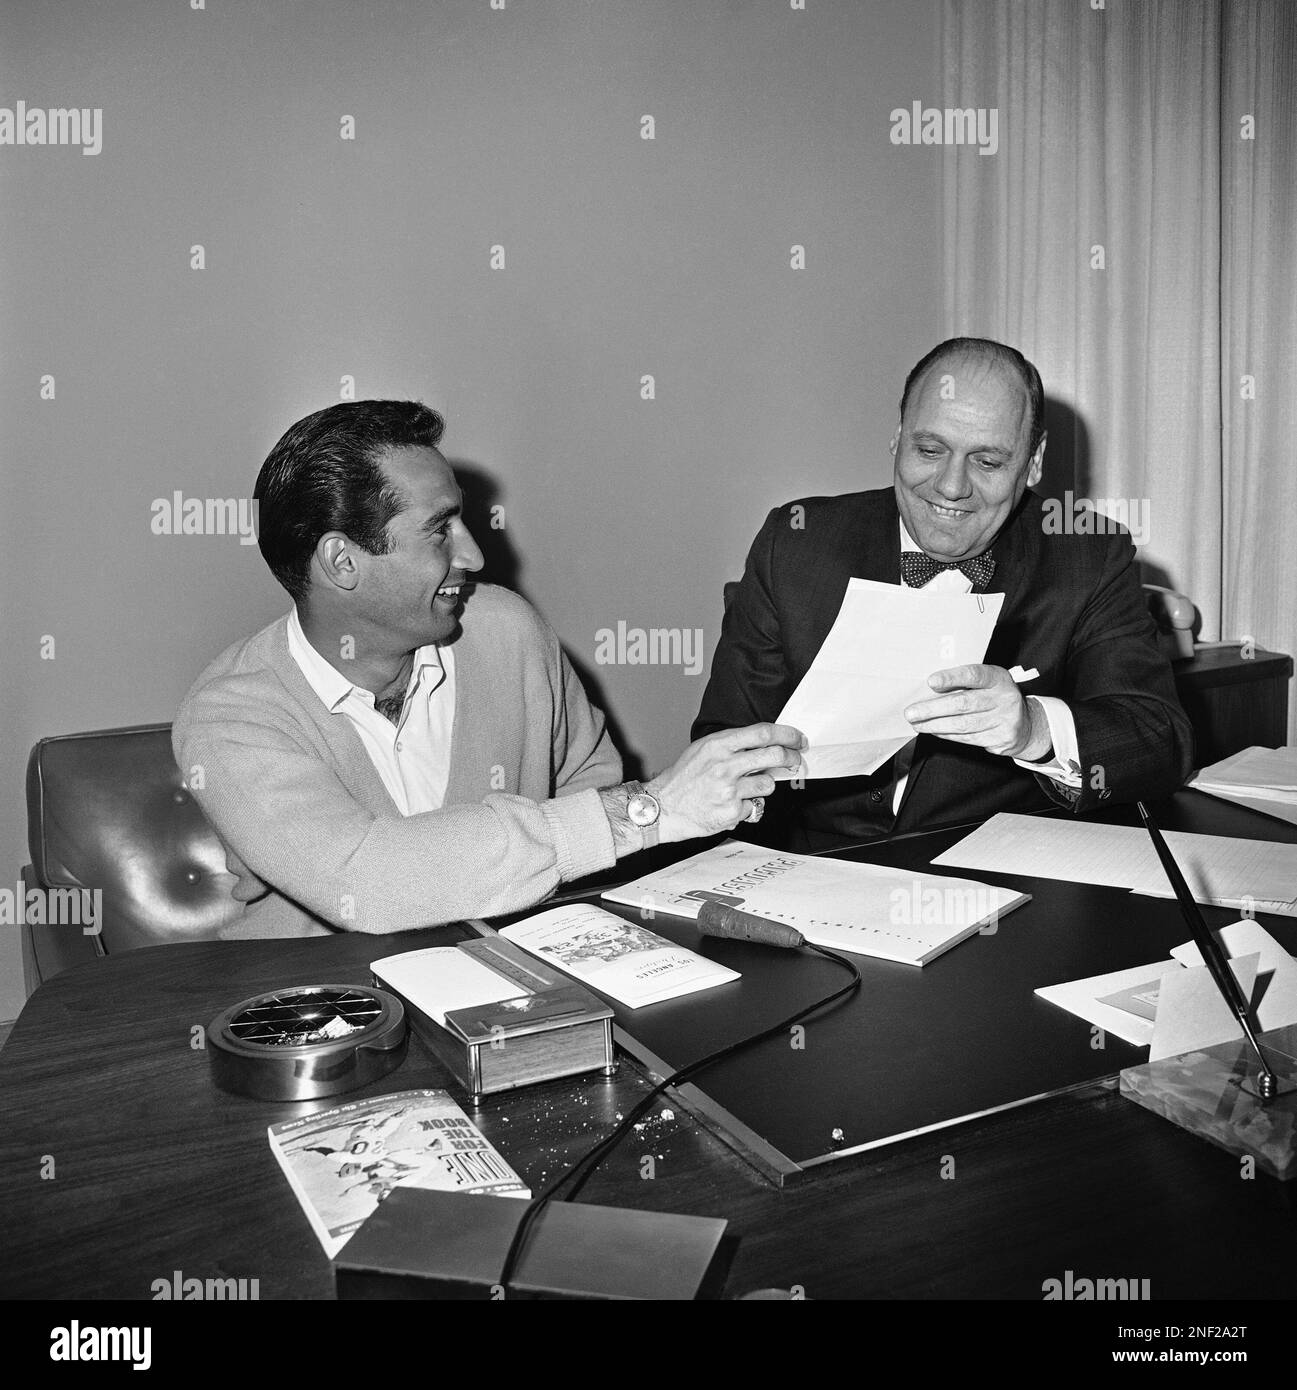 https://c8.alamy.com/comp/2NF2A2T/southpaw-sandy-koufax-demonstrates-for-the-benefit-of-photographers-how-he-signed-his-contract-for-1964-with-the-los-angeles-dodgers-after-he-and-general-manager-e-j-buzzy-bavasi-right-came-to-terms-following-a-three-hour-conference-feb-28-1964-in-los-angeles-sandy-signed-for-a-salary-reported-to-be-around-70000-sandy-said-he-planned-to-be-aboard-the-dodger-plane-when-it-leaves-for-spring-training-camp-in-florida-ap-photoed-widdis-2NF2A2T.jpg